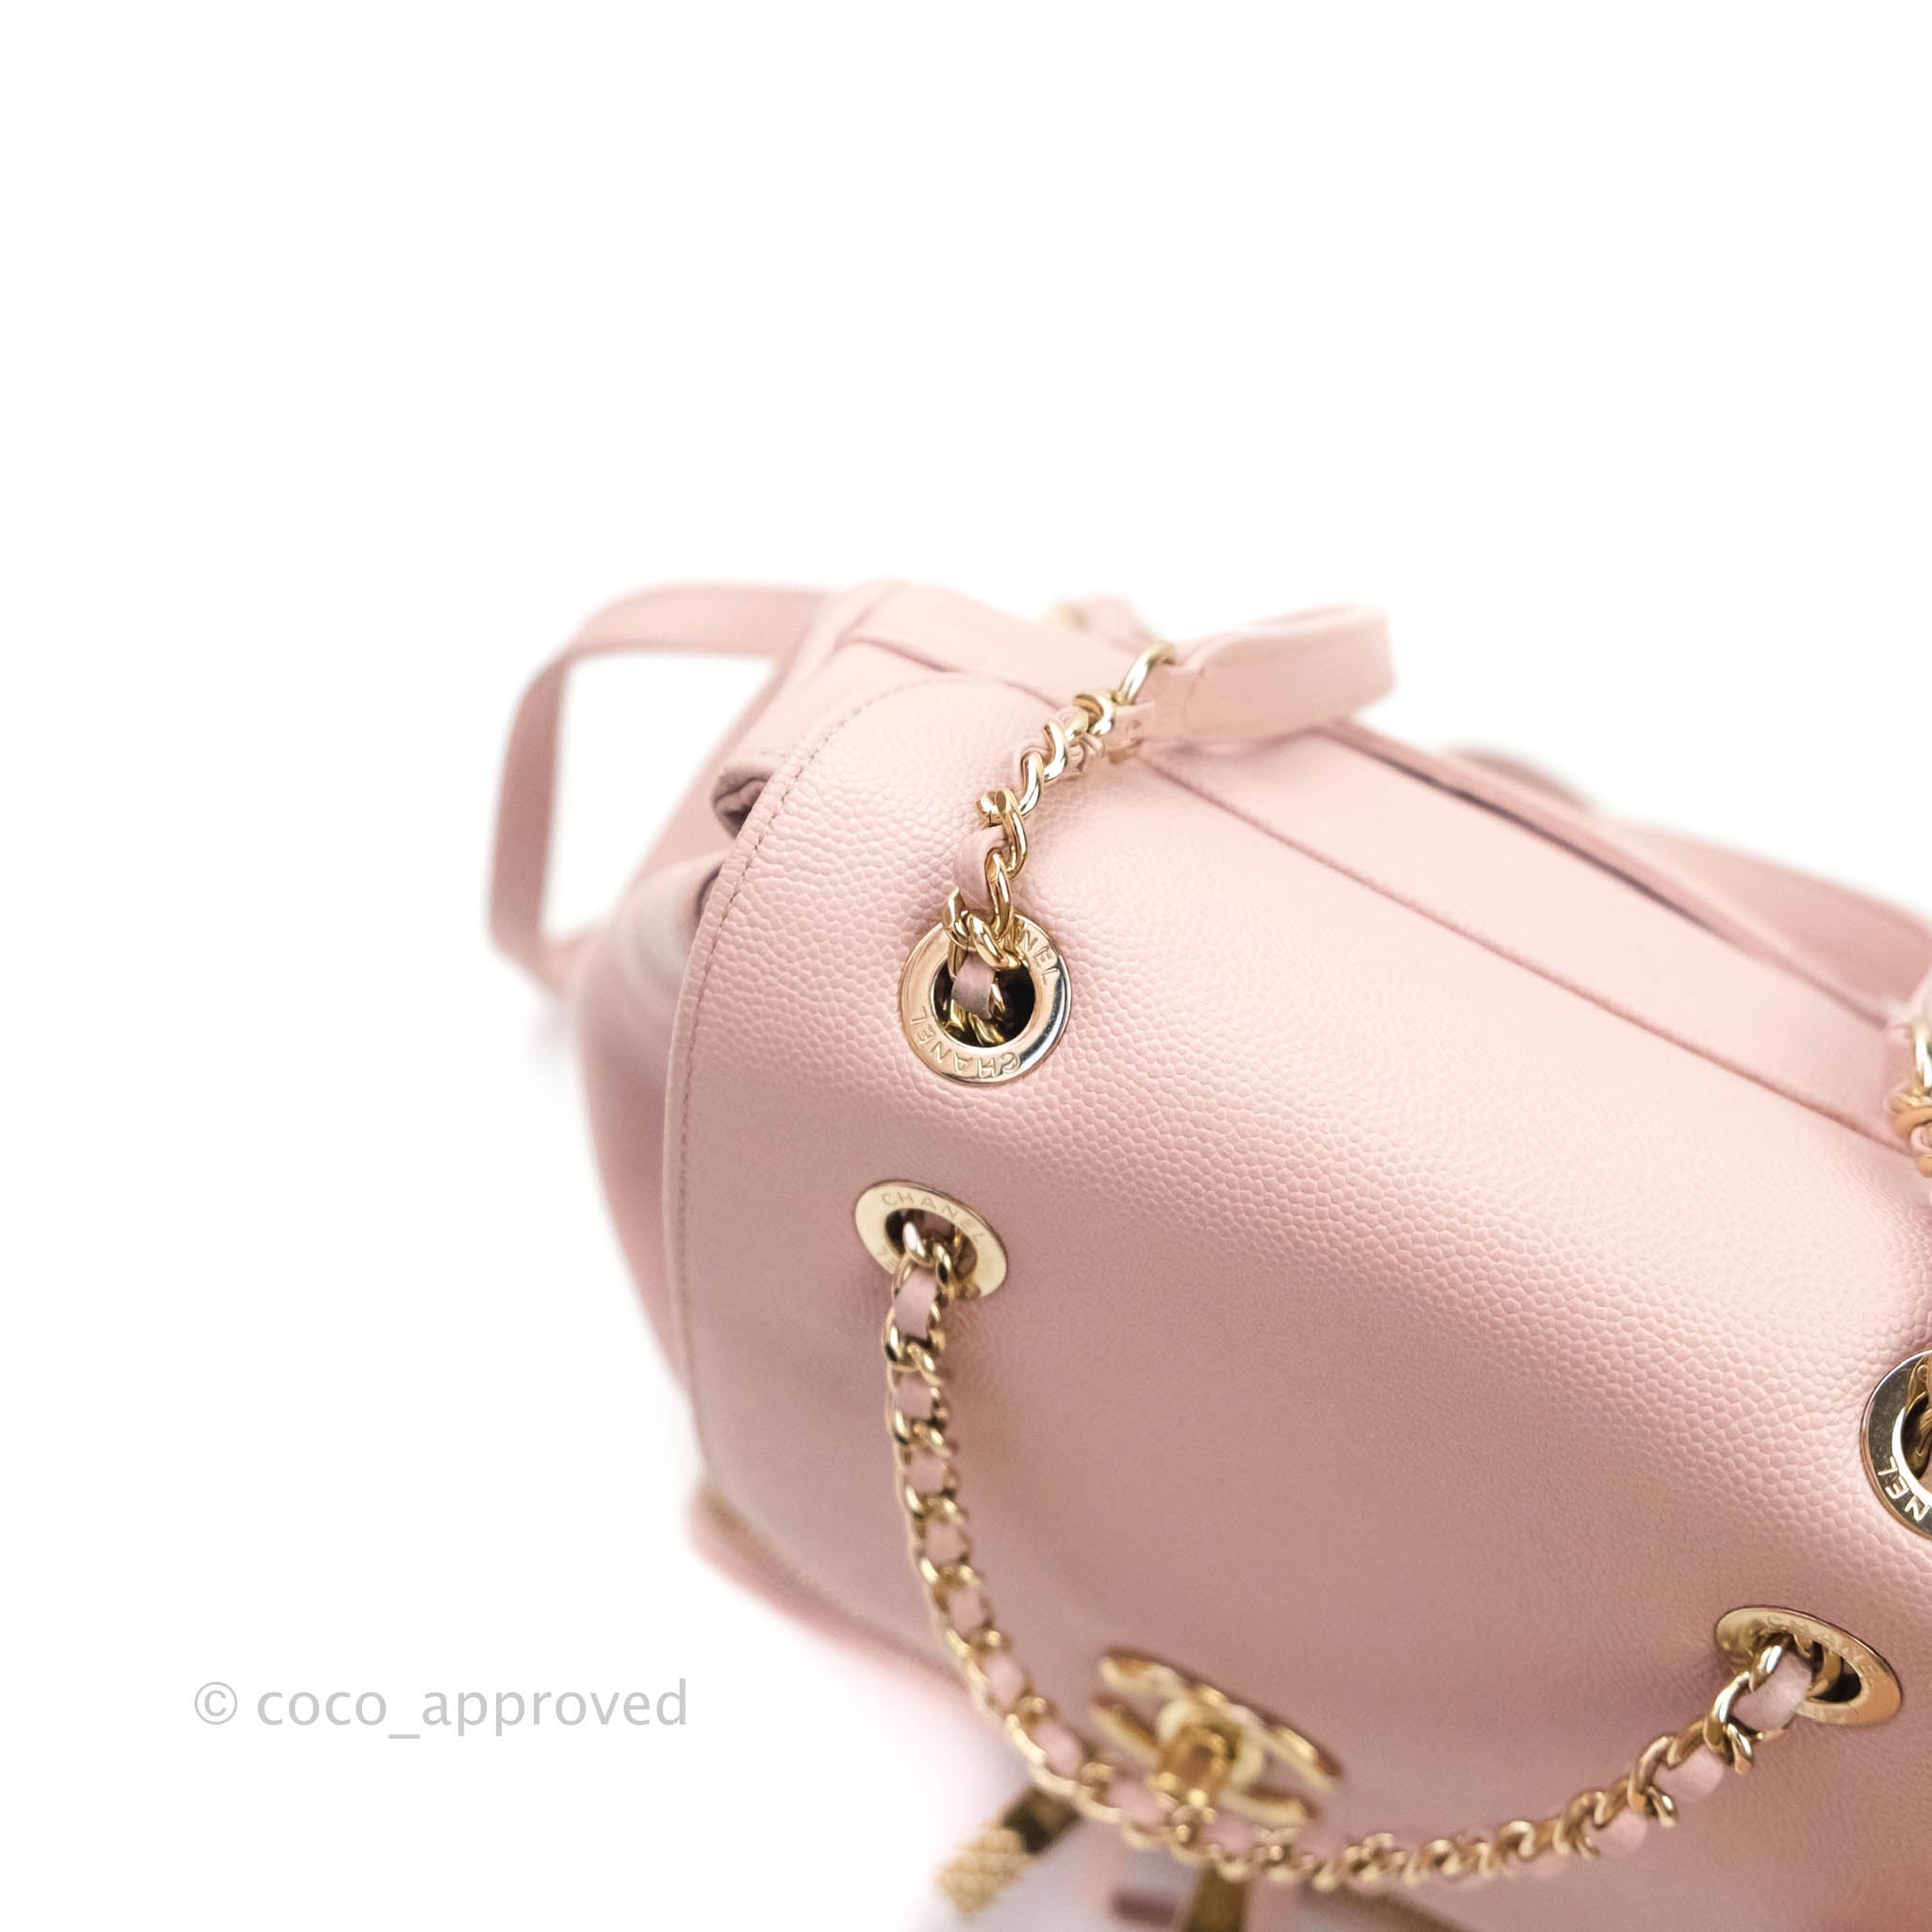 🆕 AUTHENTIC CHANEL SMALL BUSINESS AFFINITY FLAP PINK CAVIAR IN